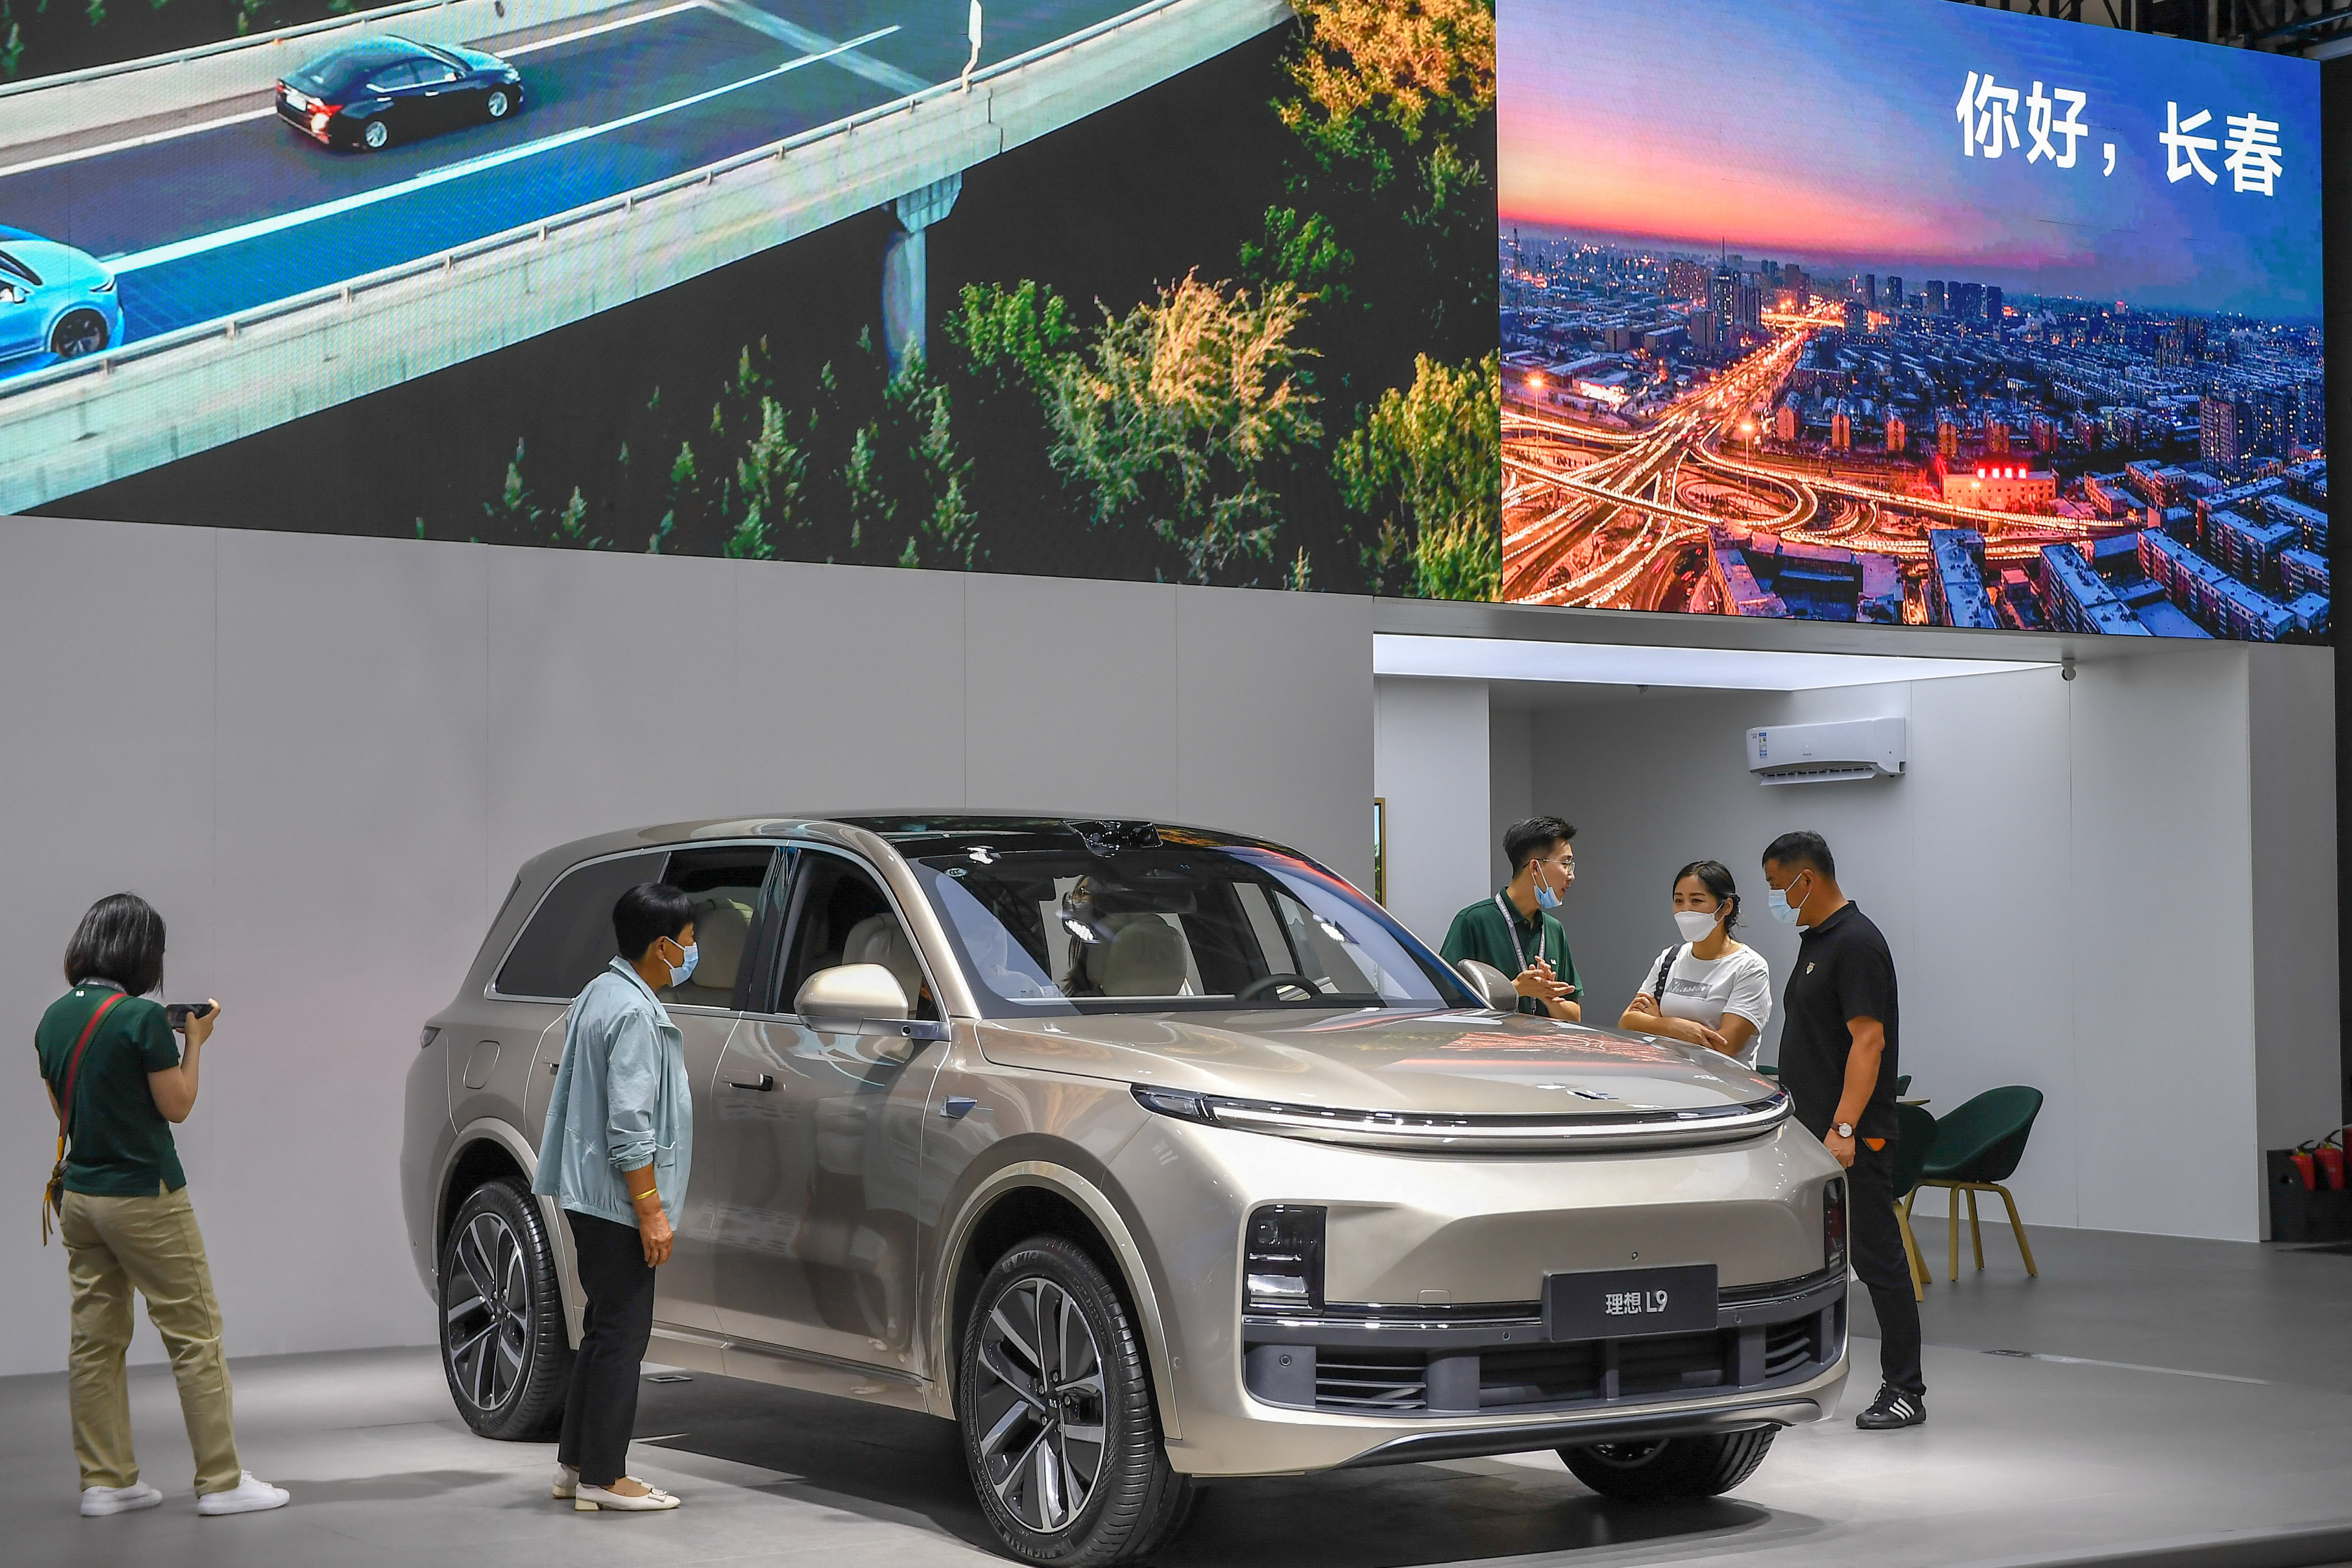 Electric cars: Li Auto's deliveries likely to disappoint in third quarter  as supply chain constraints hinder production | South China Morning Post